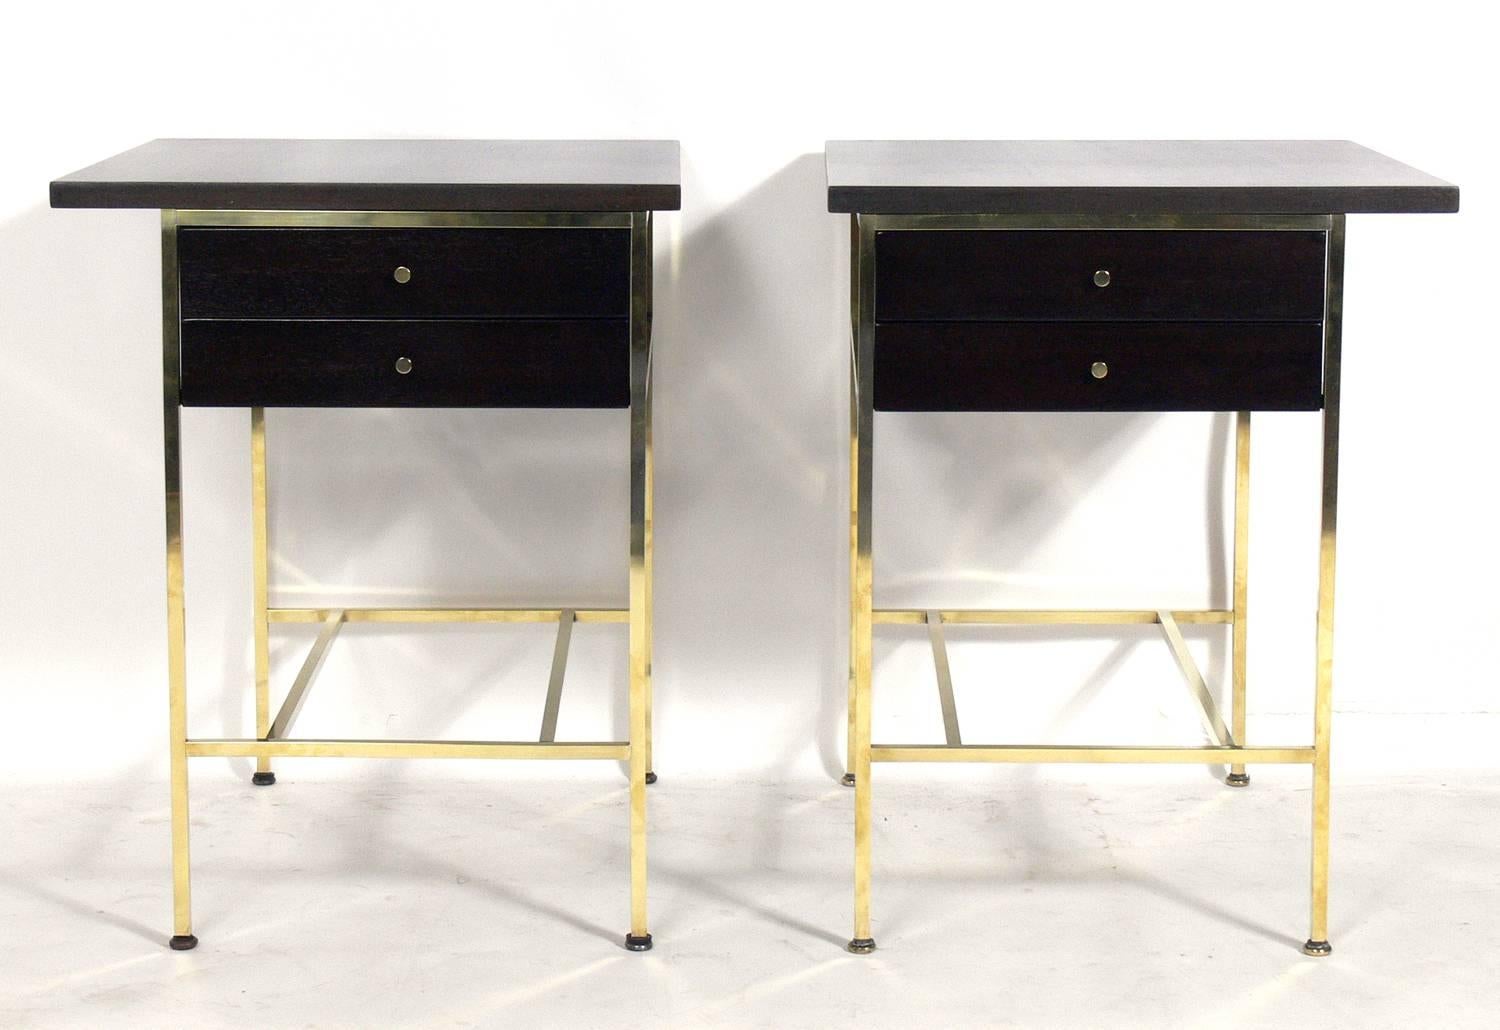 Pair of modern nightstands or end tables, designed by Paul McCobb for Calvin, American, circa 1950s. They have been completely restored in an ultra-deep brown finish with the brass elements hand polished and lacquered.